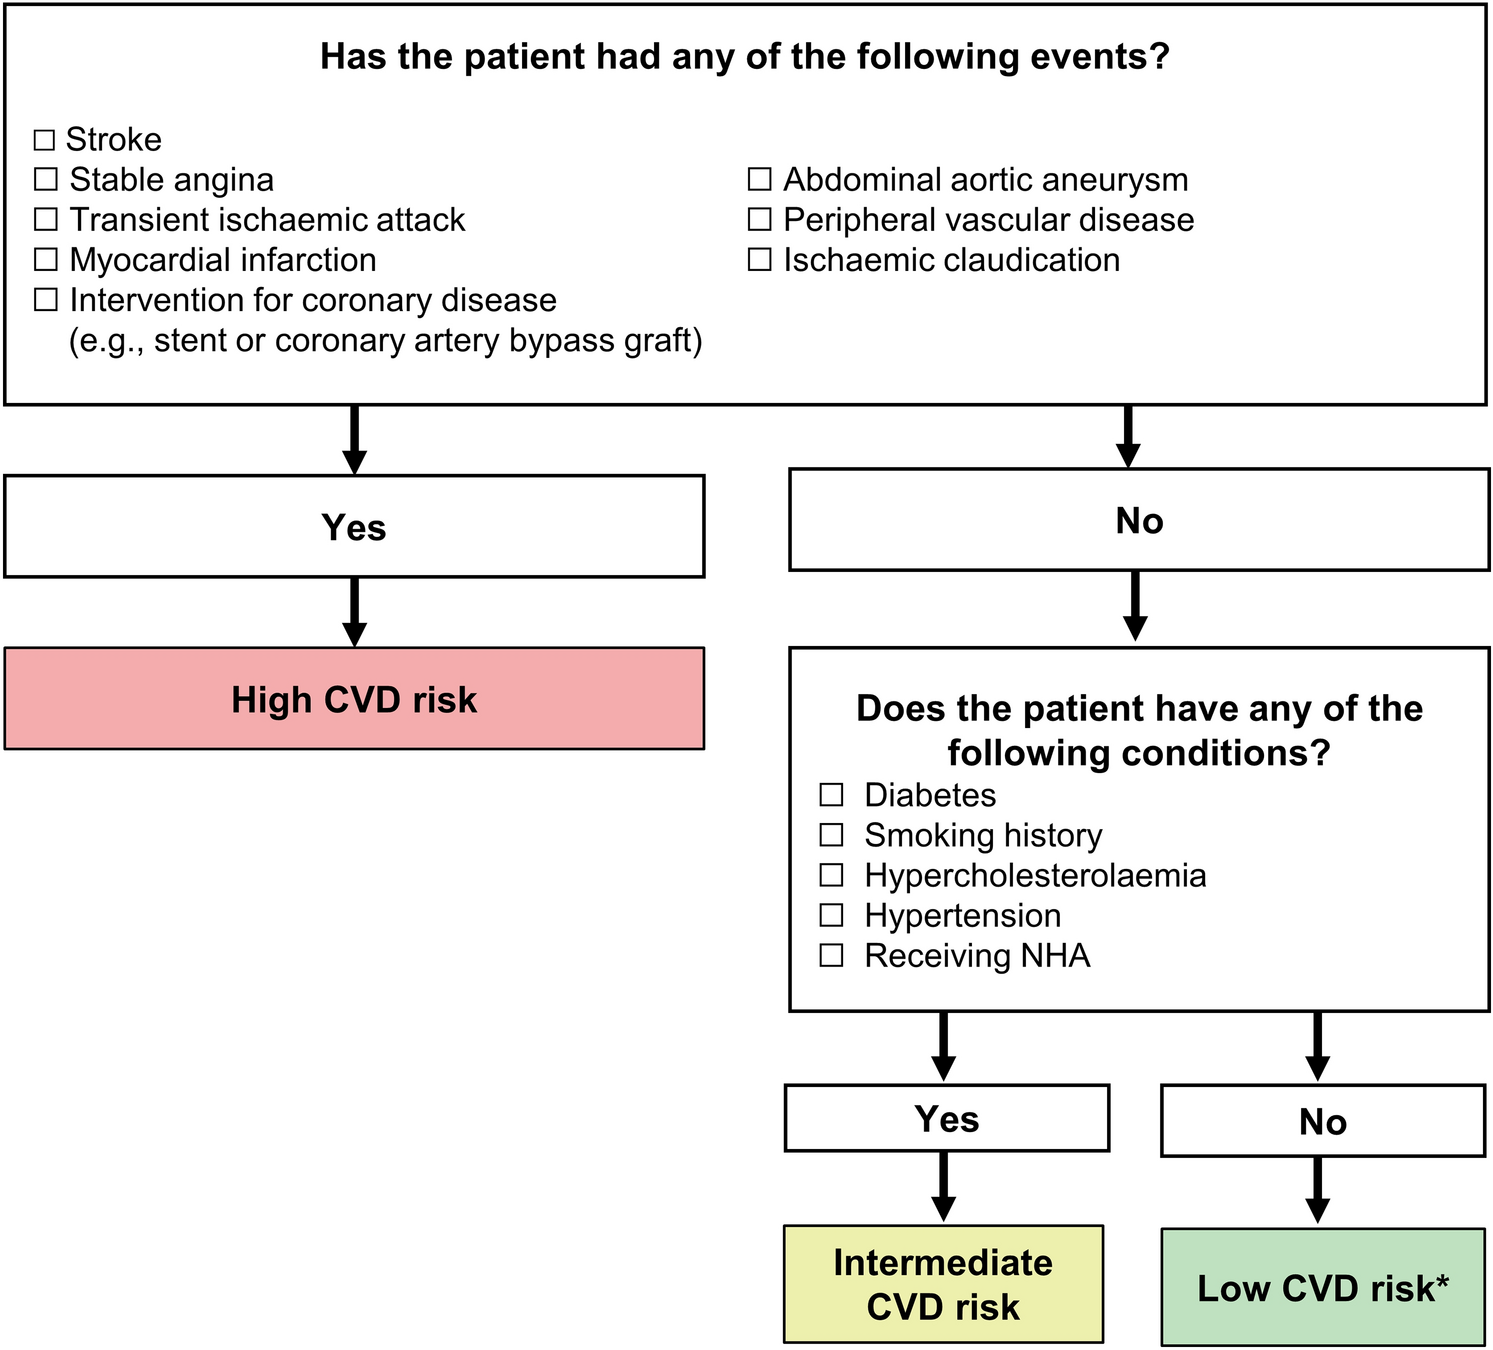 Cardiovascular disease risk assessment and multidisciplinary care in prostate cancer treatment with ADT: recommendations from the APMA PCCV expert network